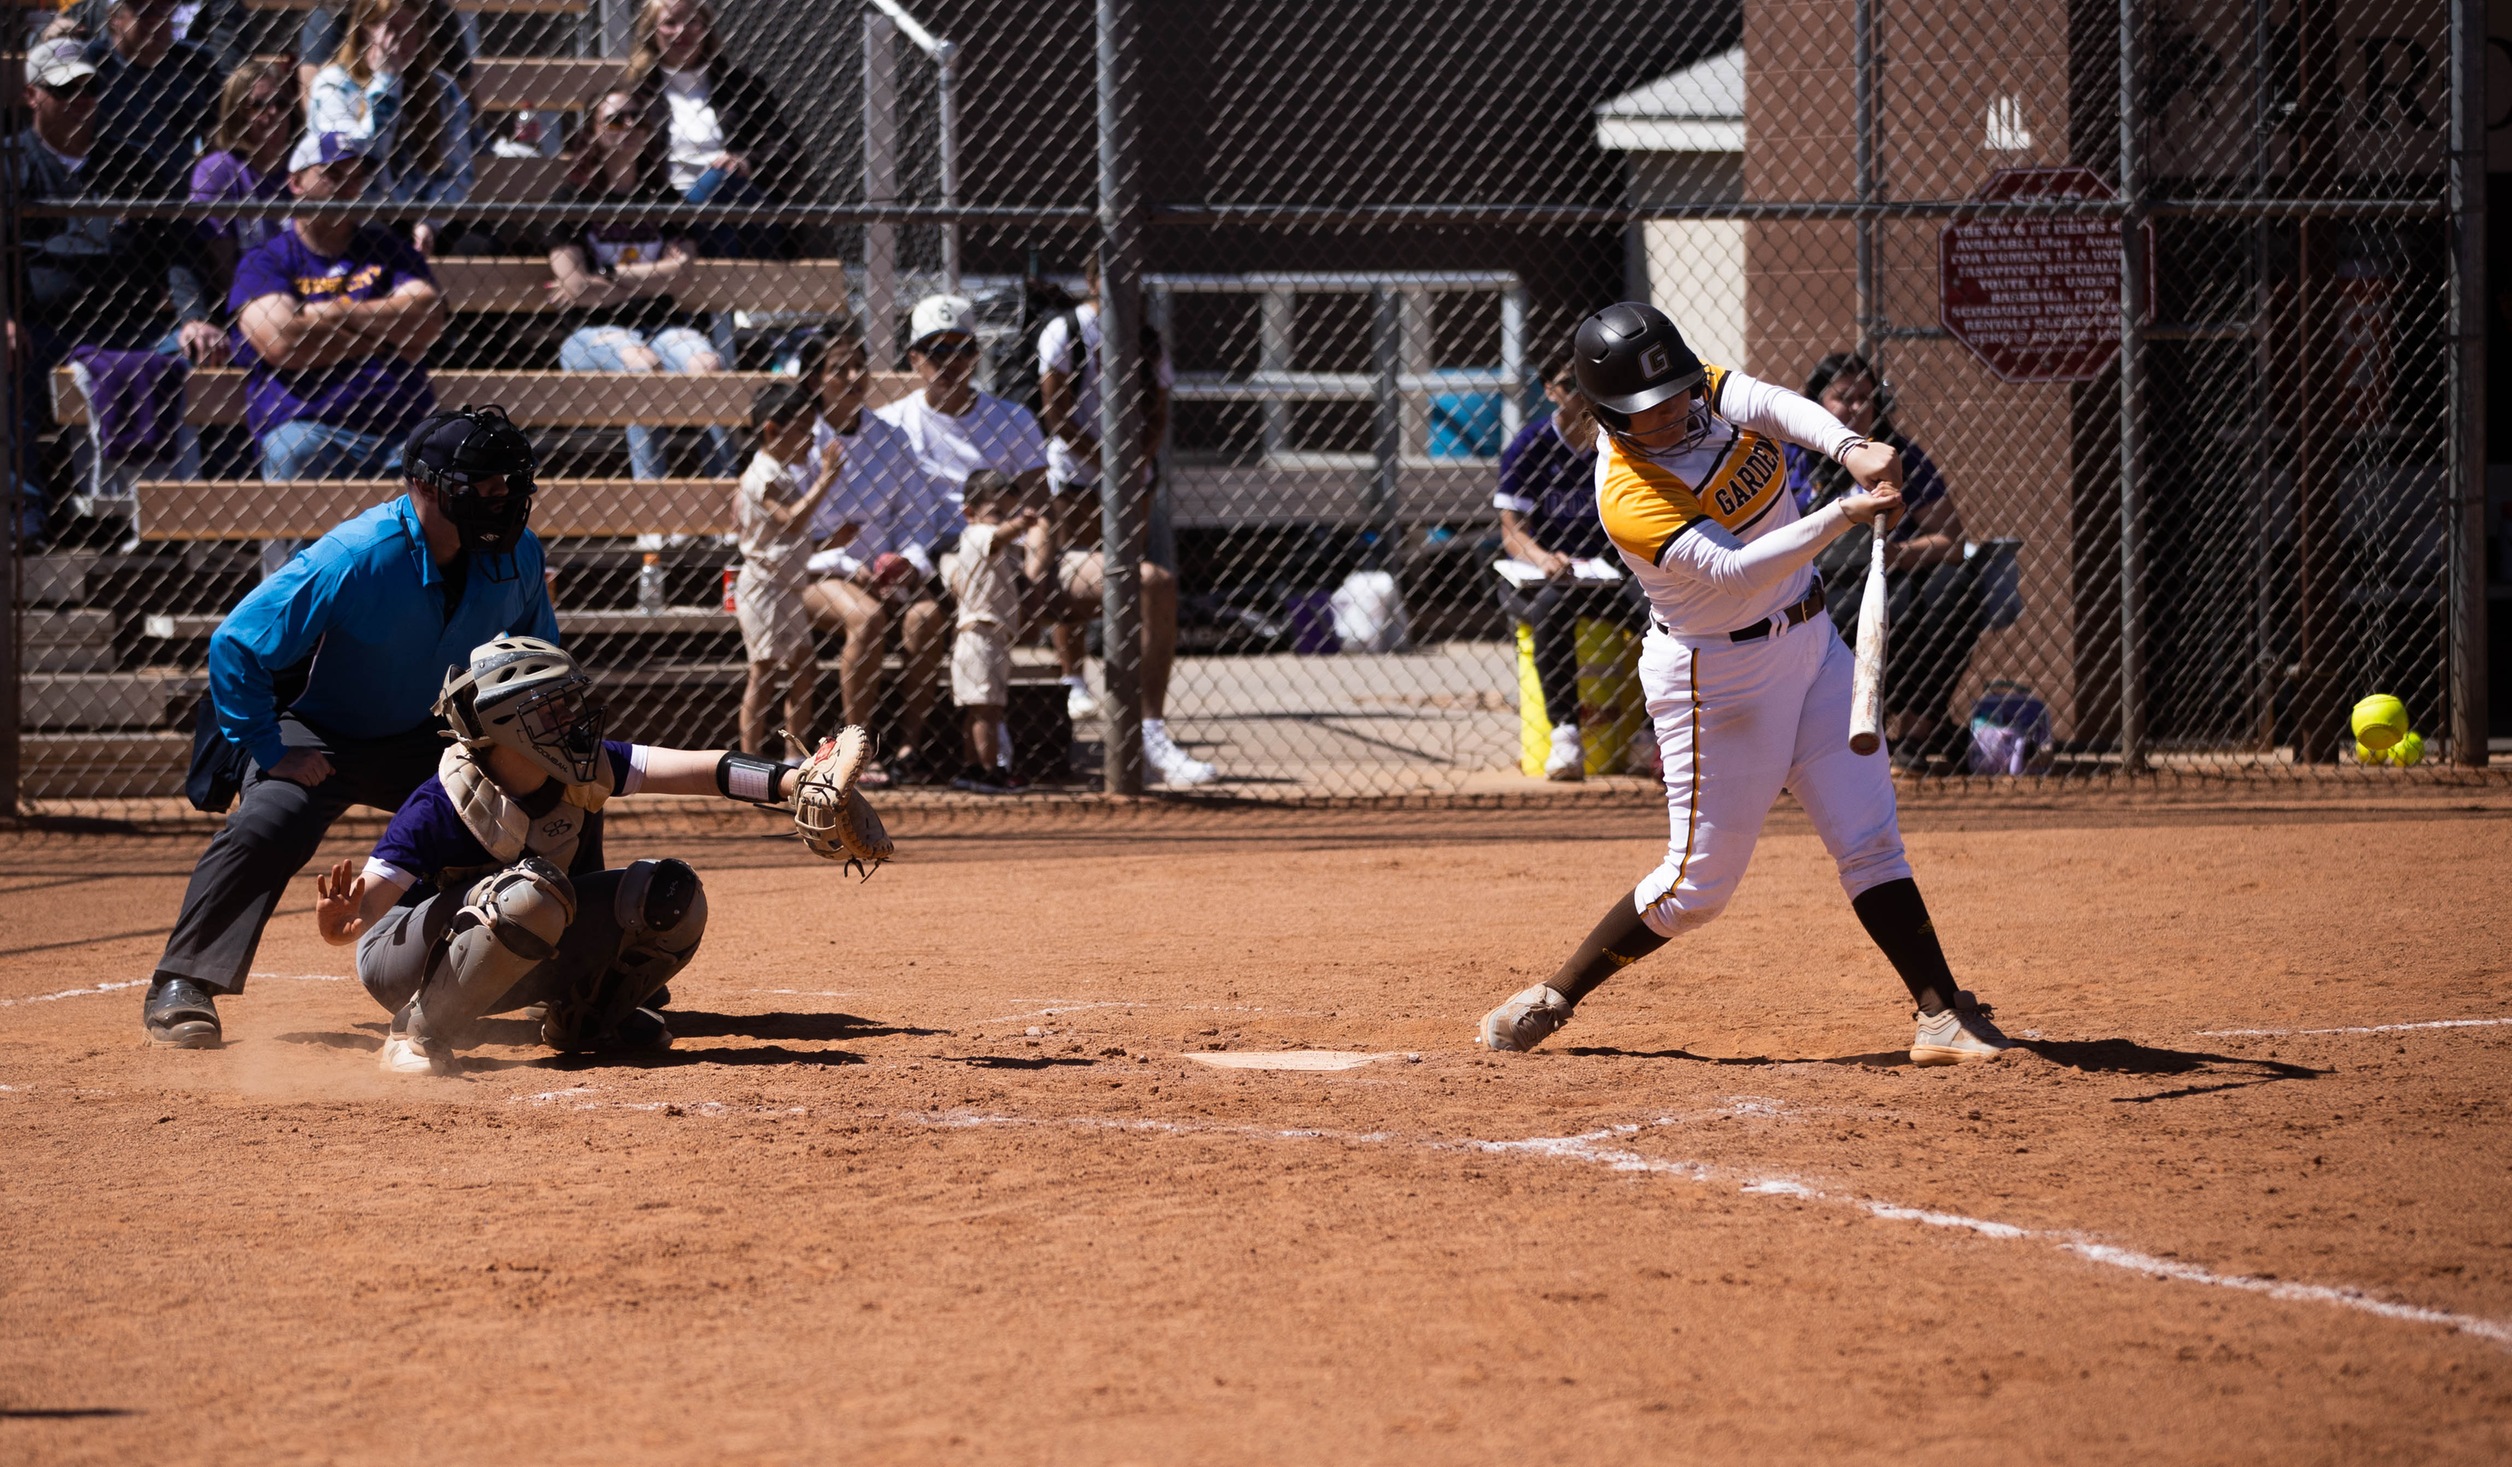 Broncbusters run-rule Dodge City in game one